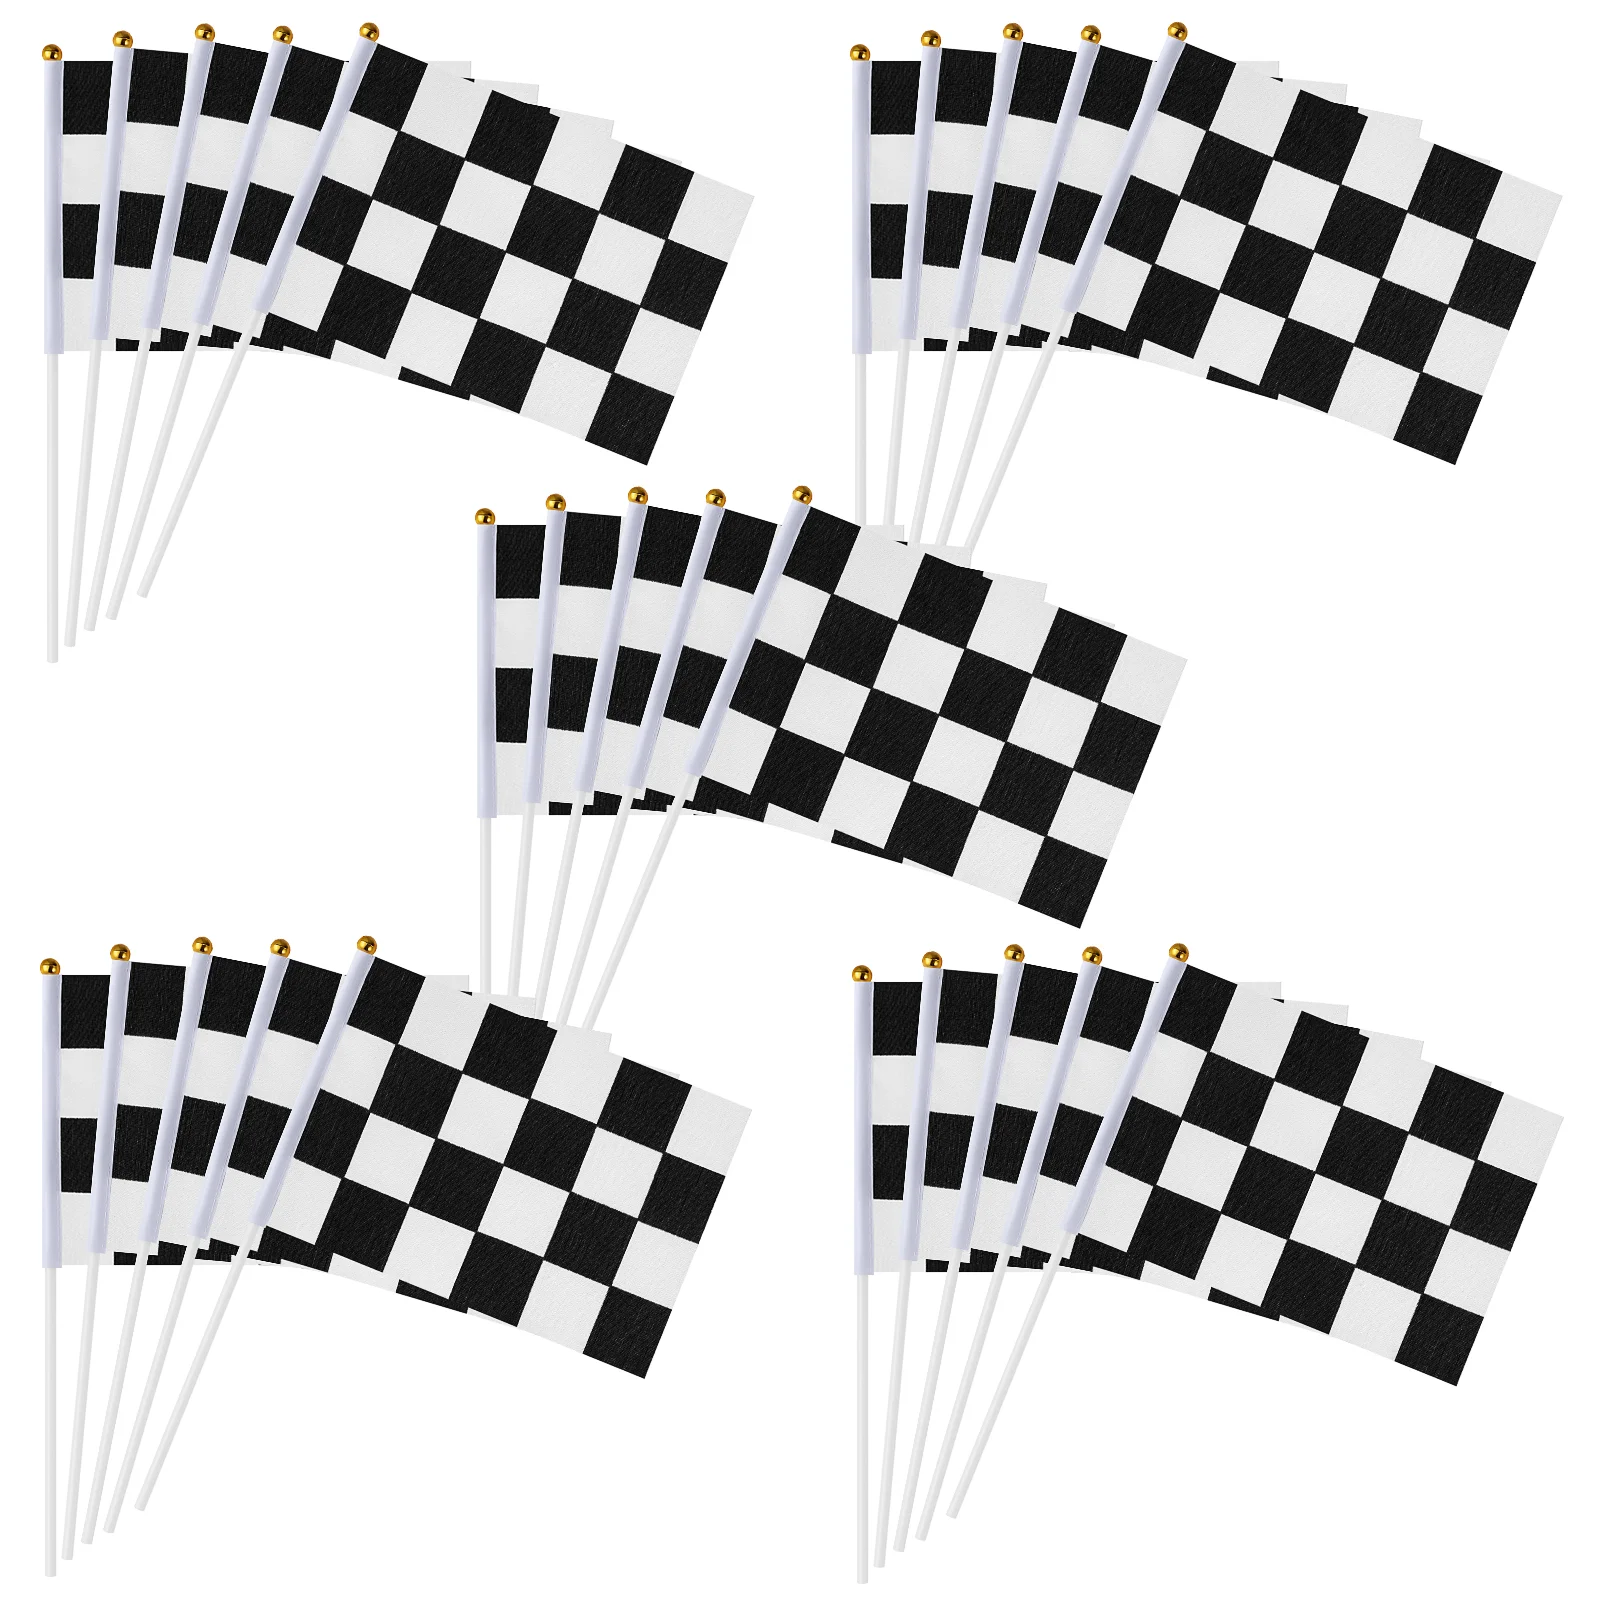 

25pcs Sports Events Flags Checkered Race Flags Polyester Flags Match Party Waving Flags with Sticks